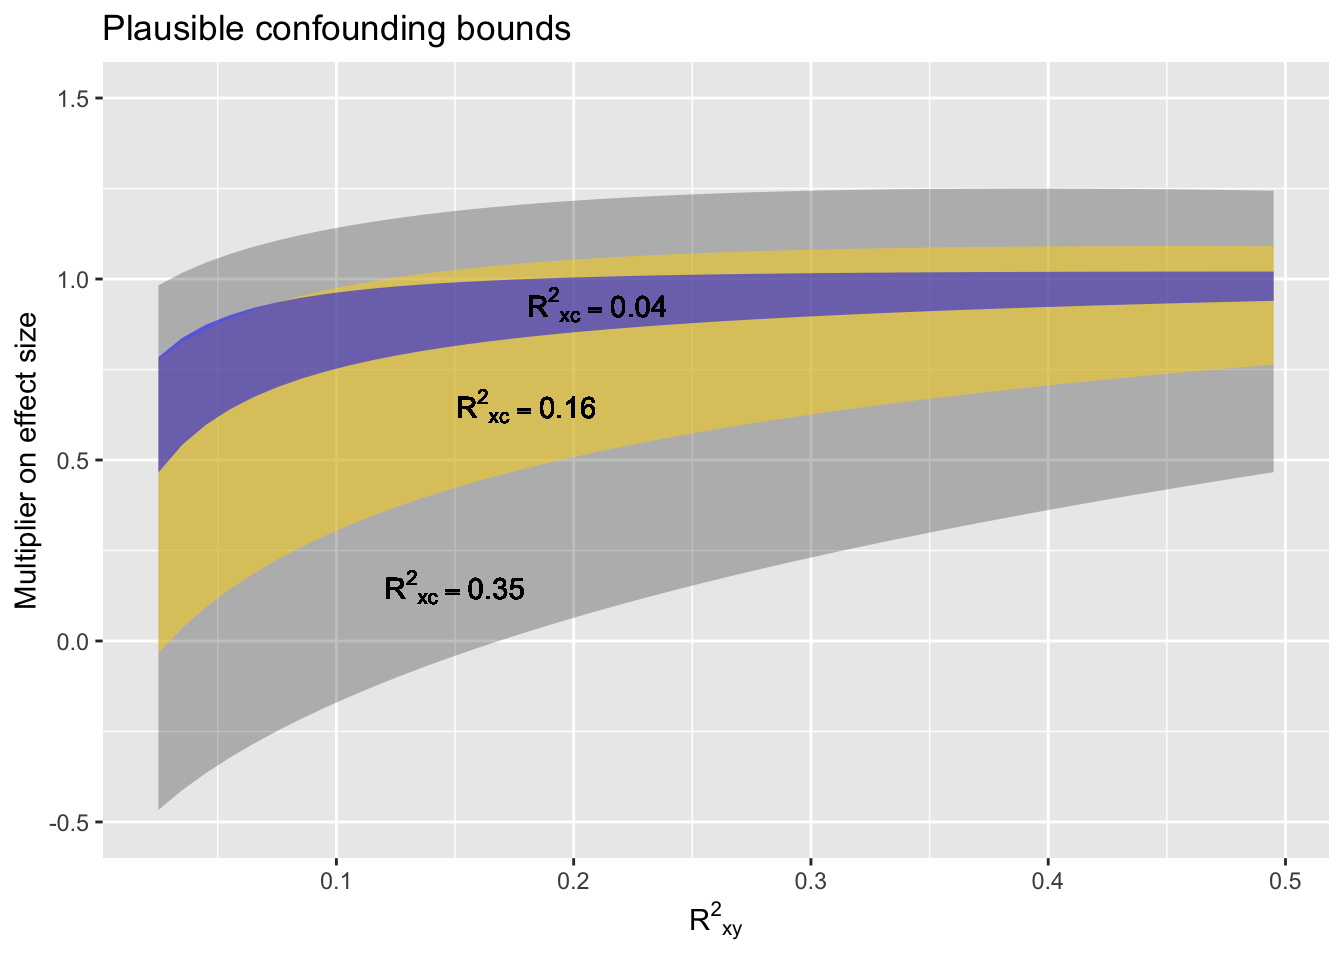 Figure 13.1. A confounding interval. Three bands are shown, each a function of the observed correlation between X and Y. The narrowest band corresponds to a weak lurking R2 of 0.04, the largest to a comparatively strong lurking R2 of 0.35. The upper and lower bounds of each band are to be multiplied by the observed X-Y effect size, giving a range of effect sizes that are plausible outcomes from the suspected confounding.